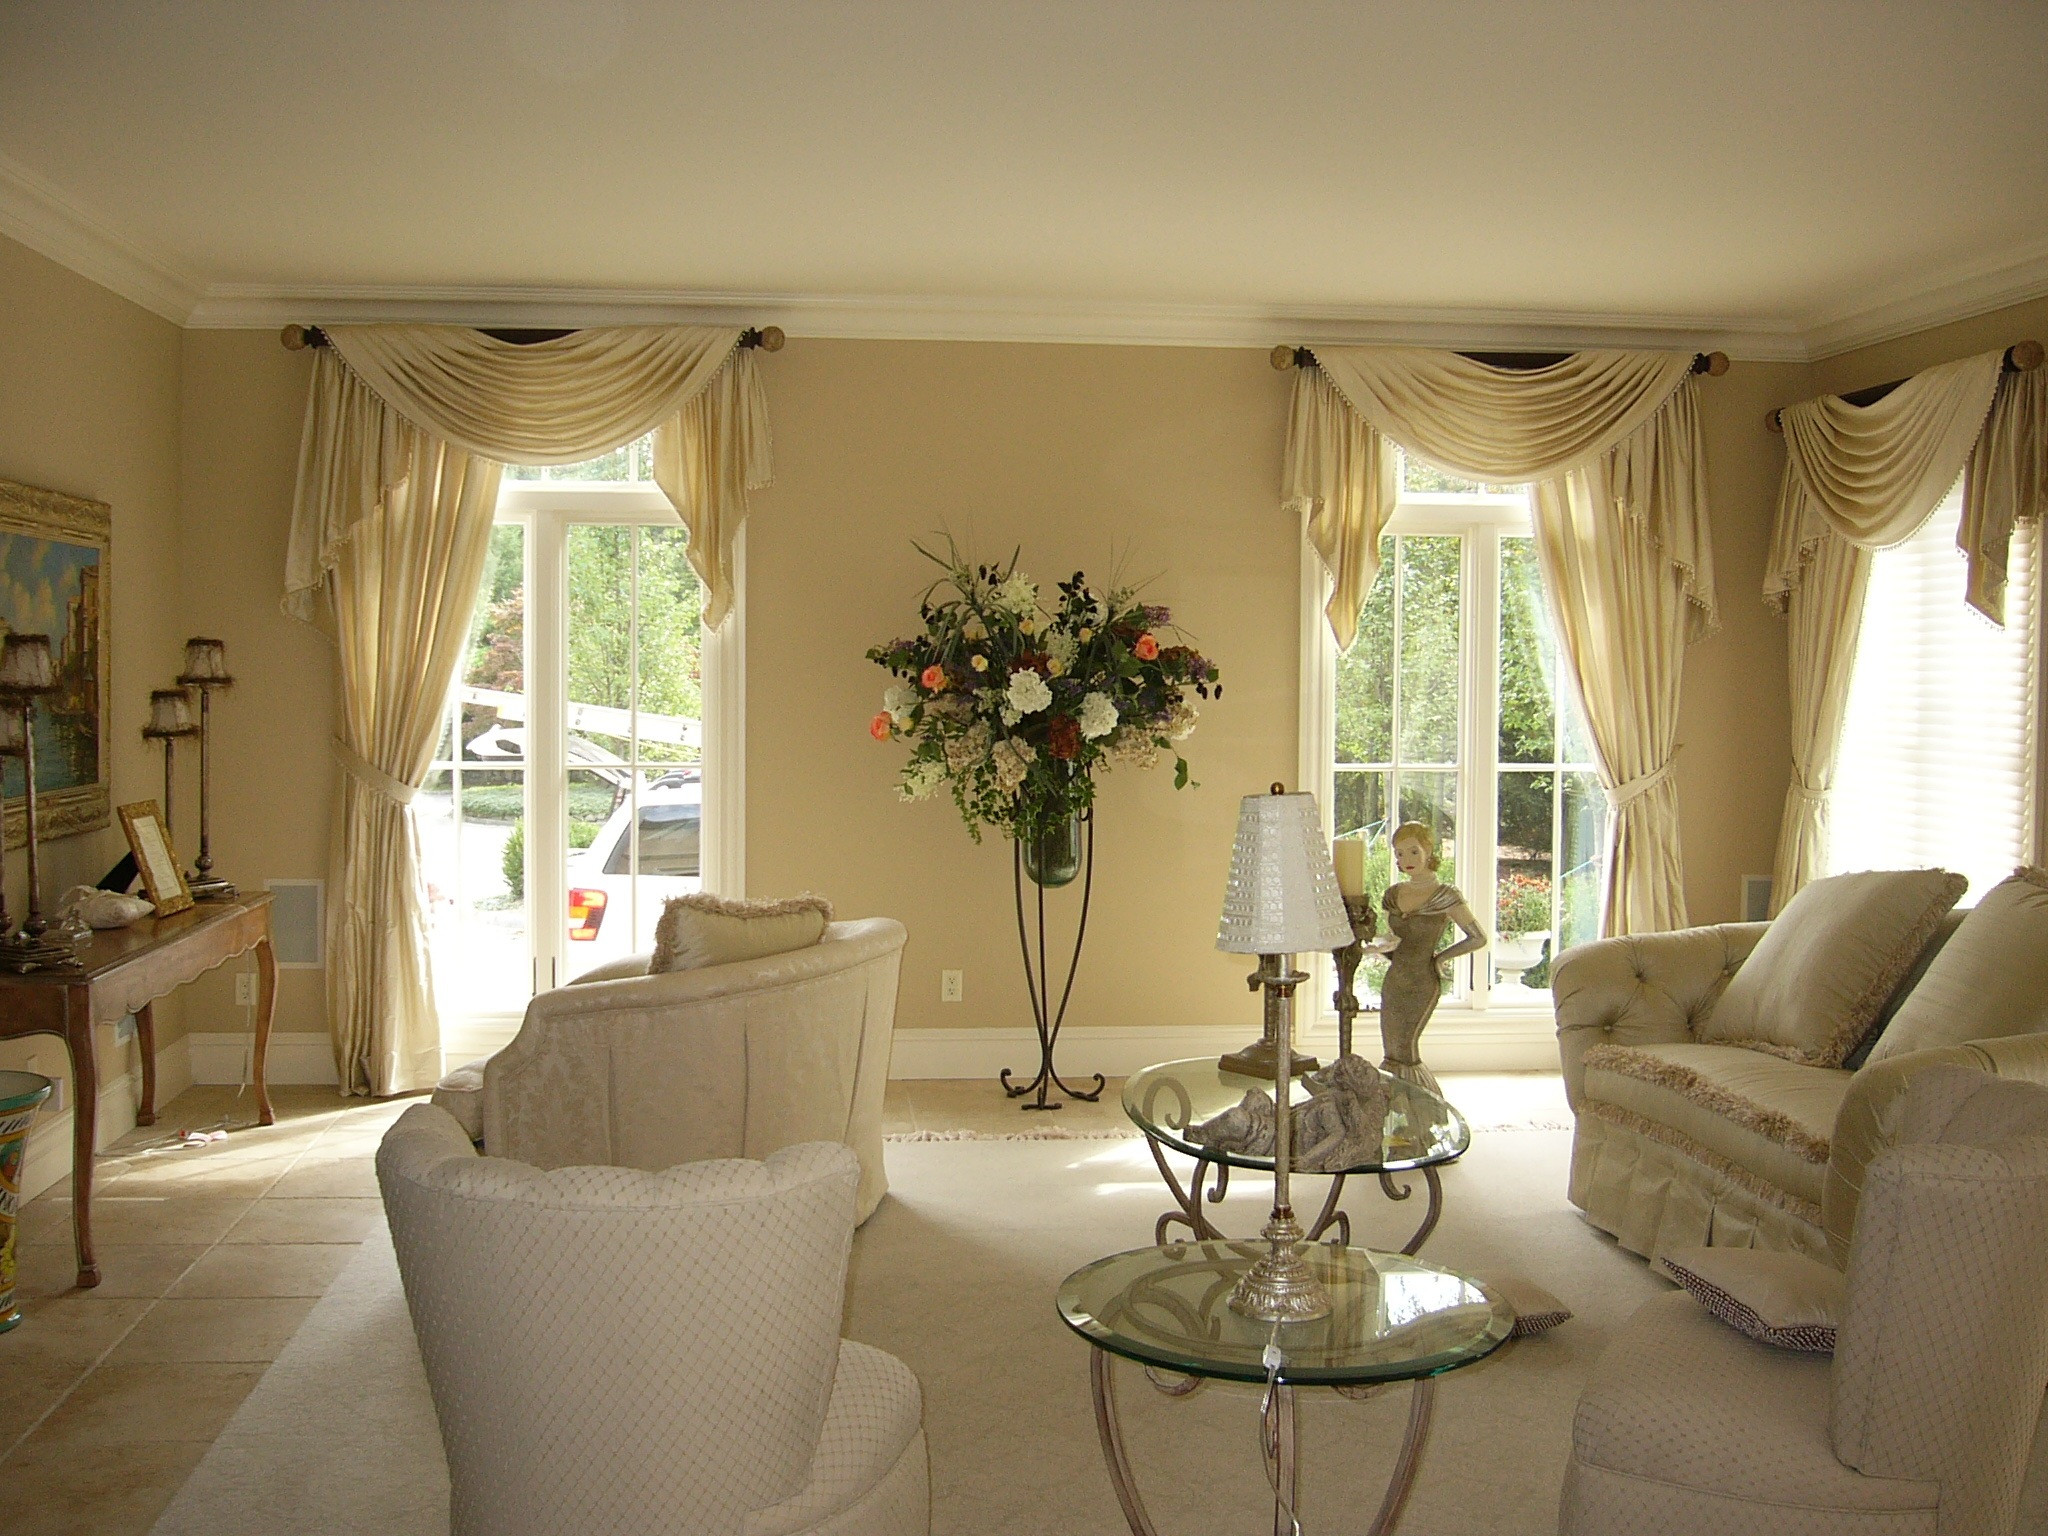 Formal Living Room Curtains
 Valances and Swags by Curtains Boutique in NJ